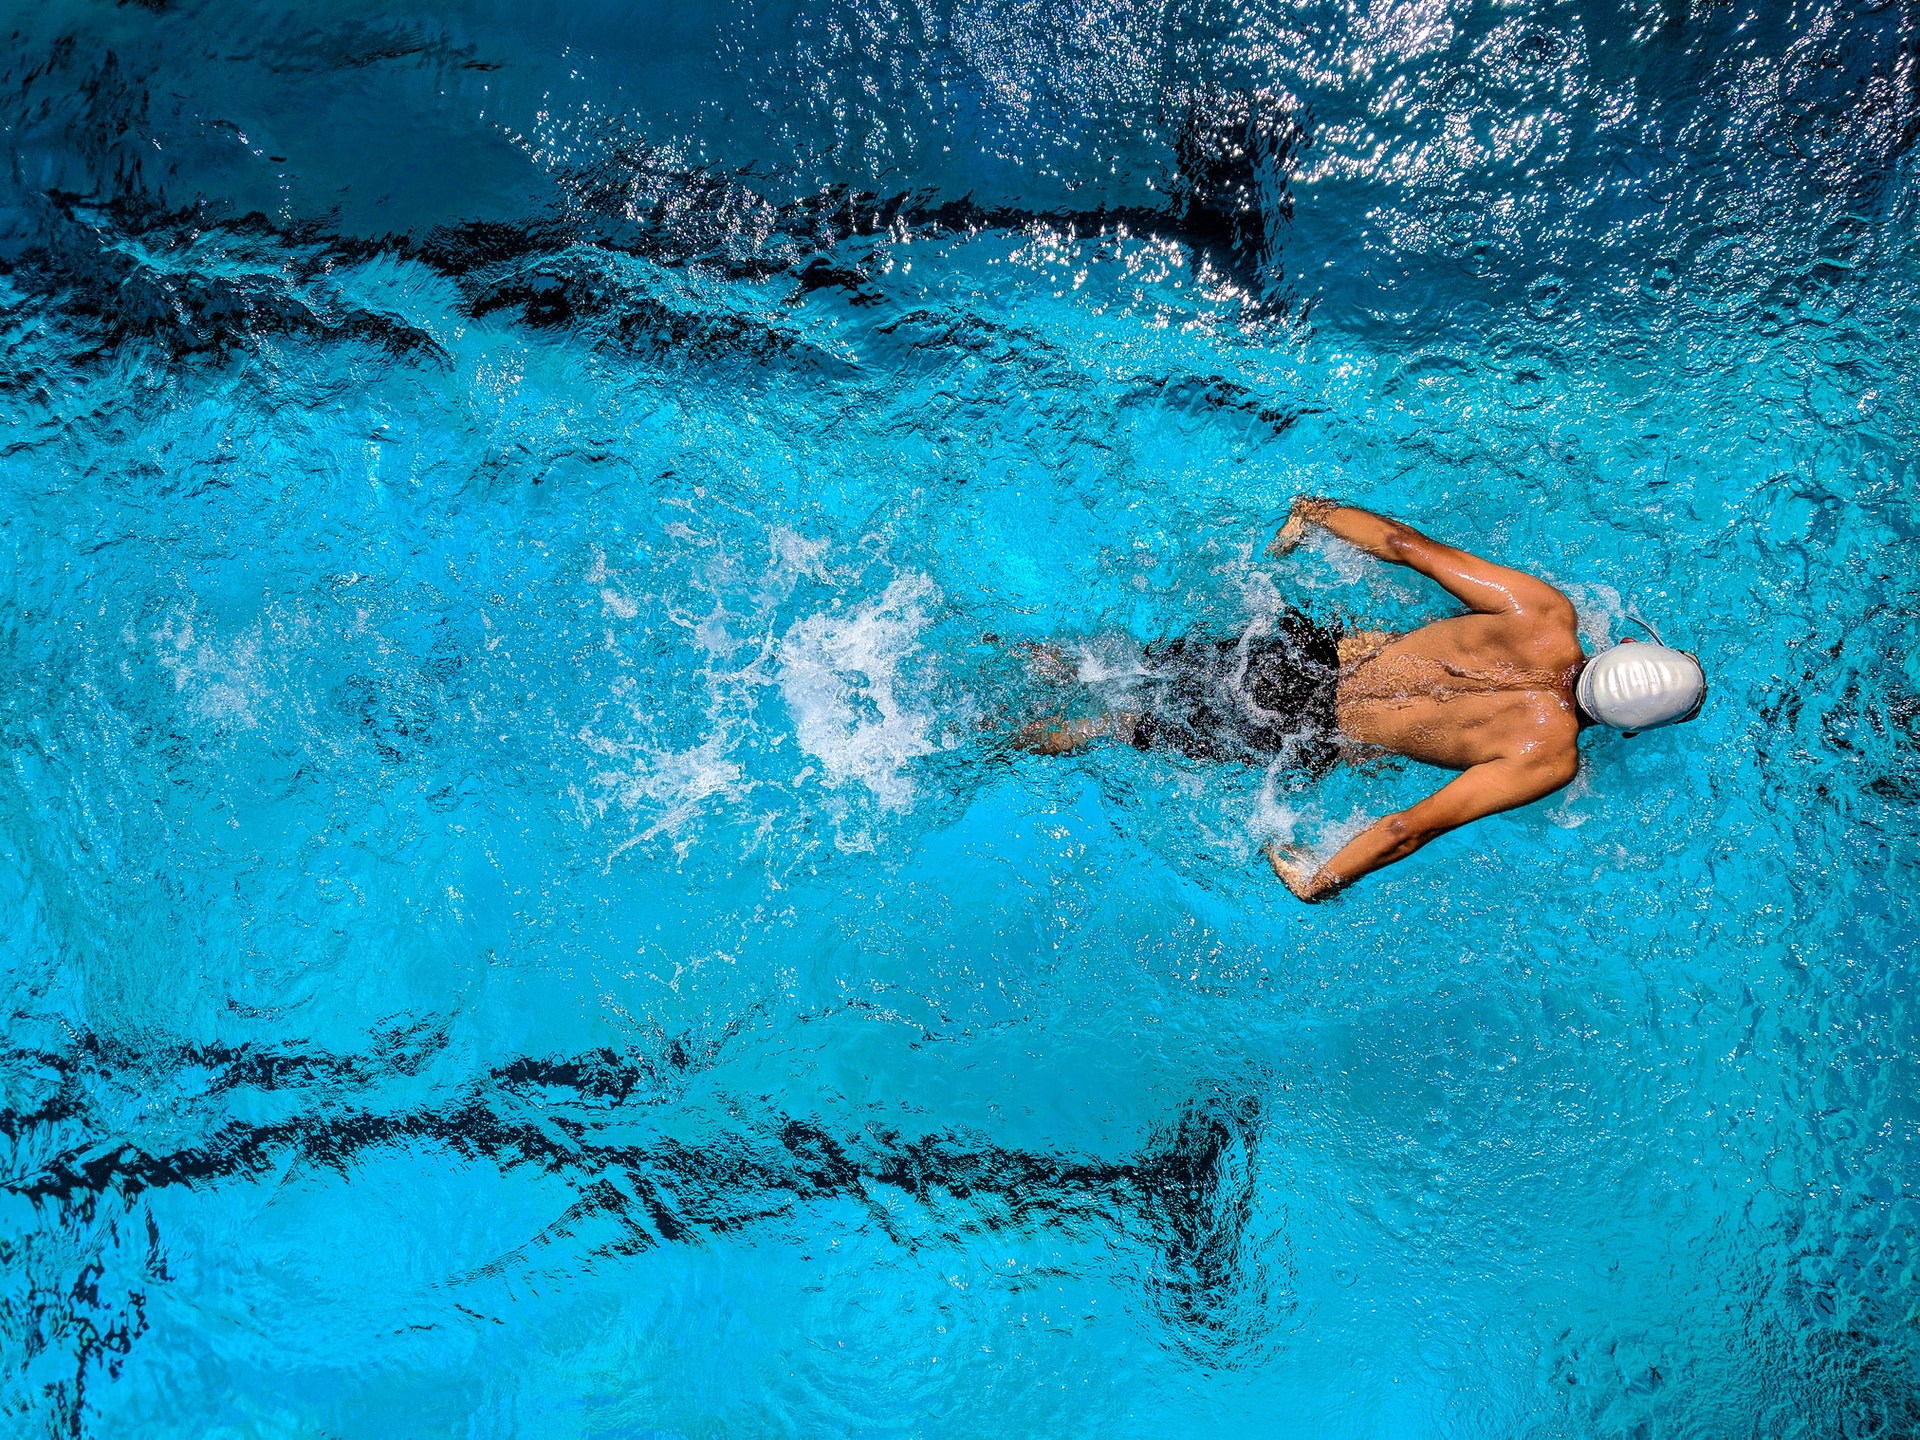 Top down view of a swimmer in a pool